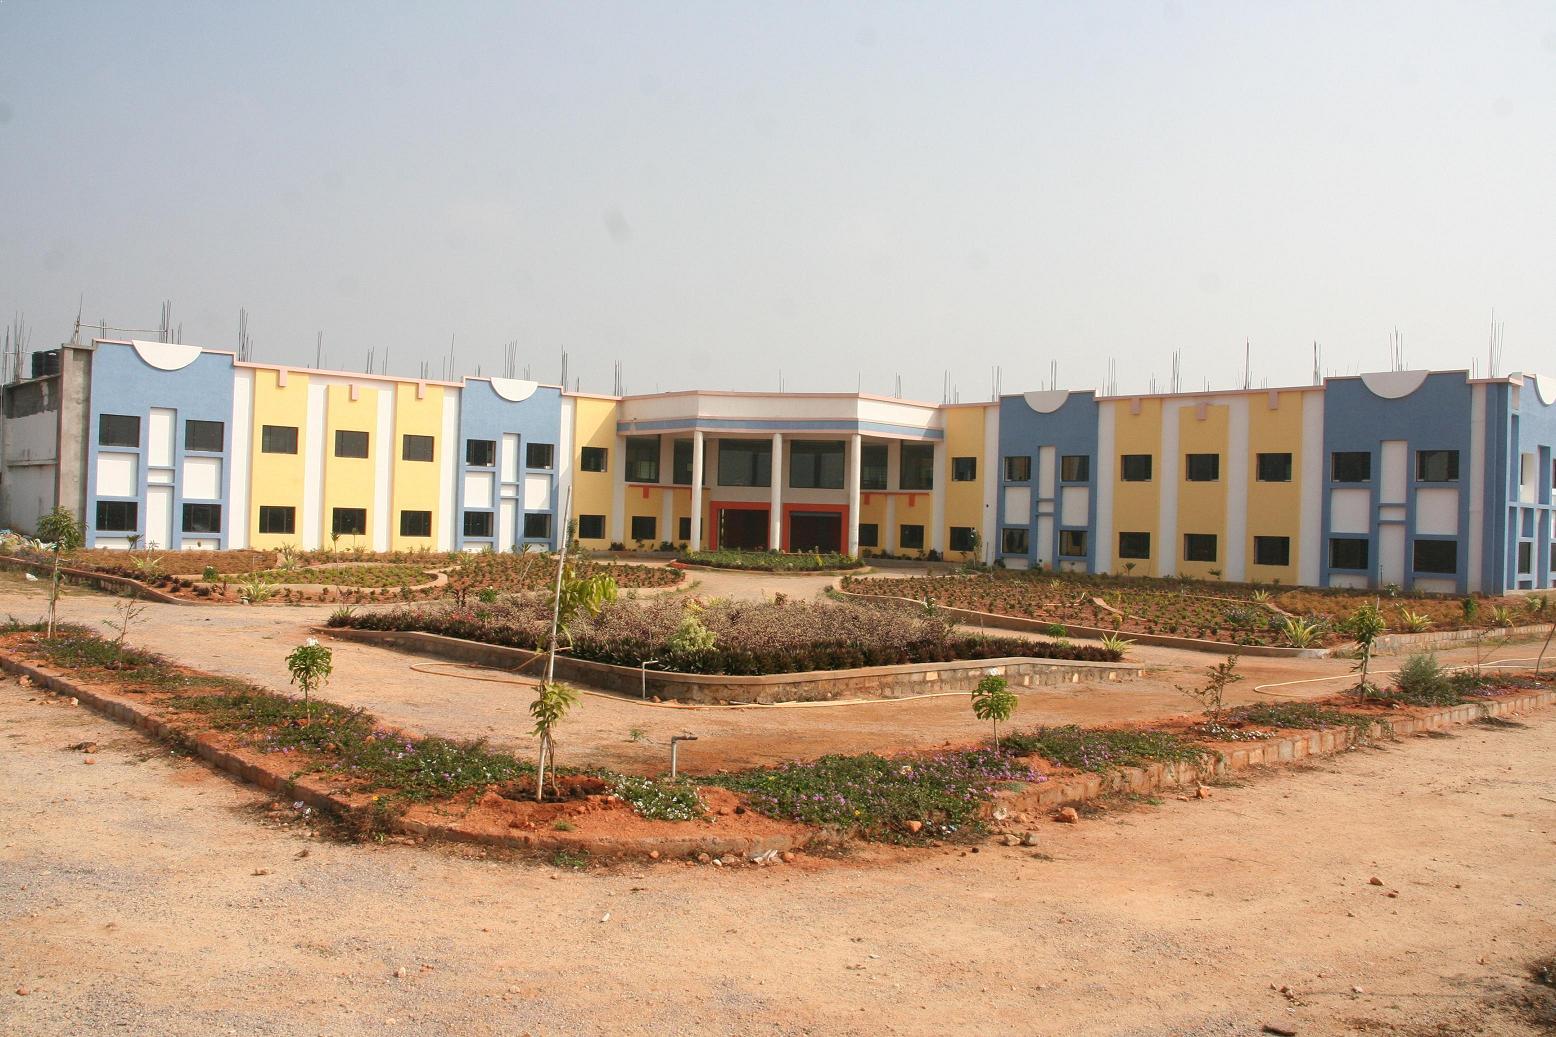 Anasuyadevi Institute of Technology and Sciences